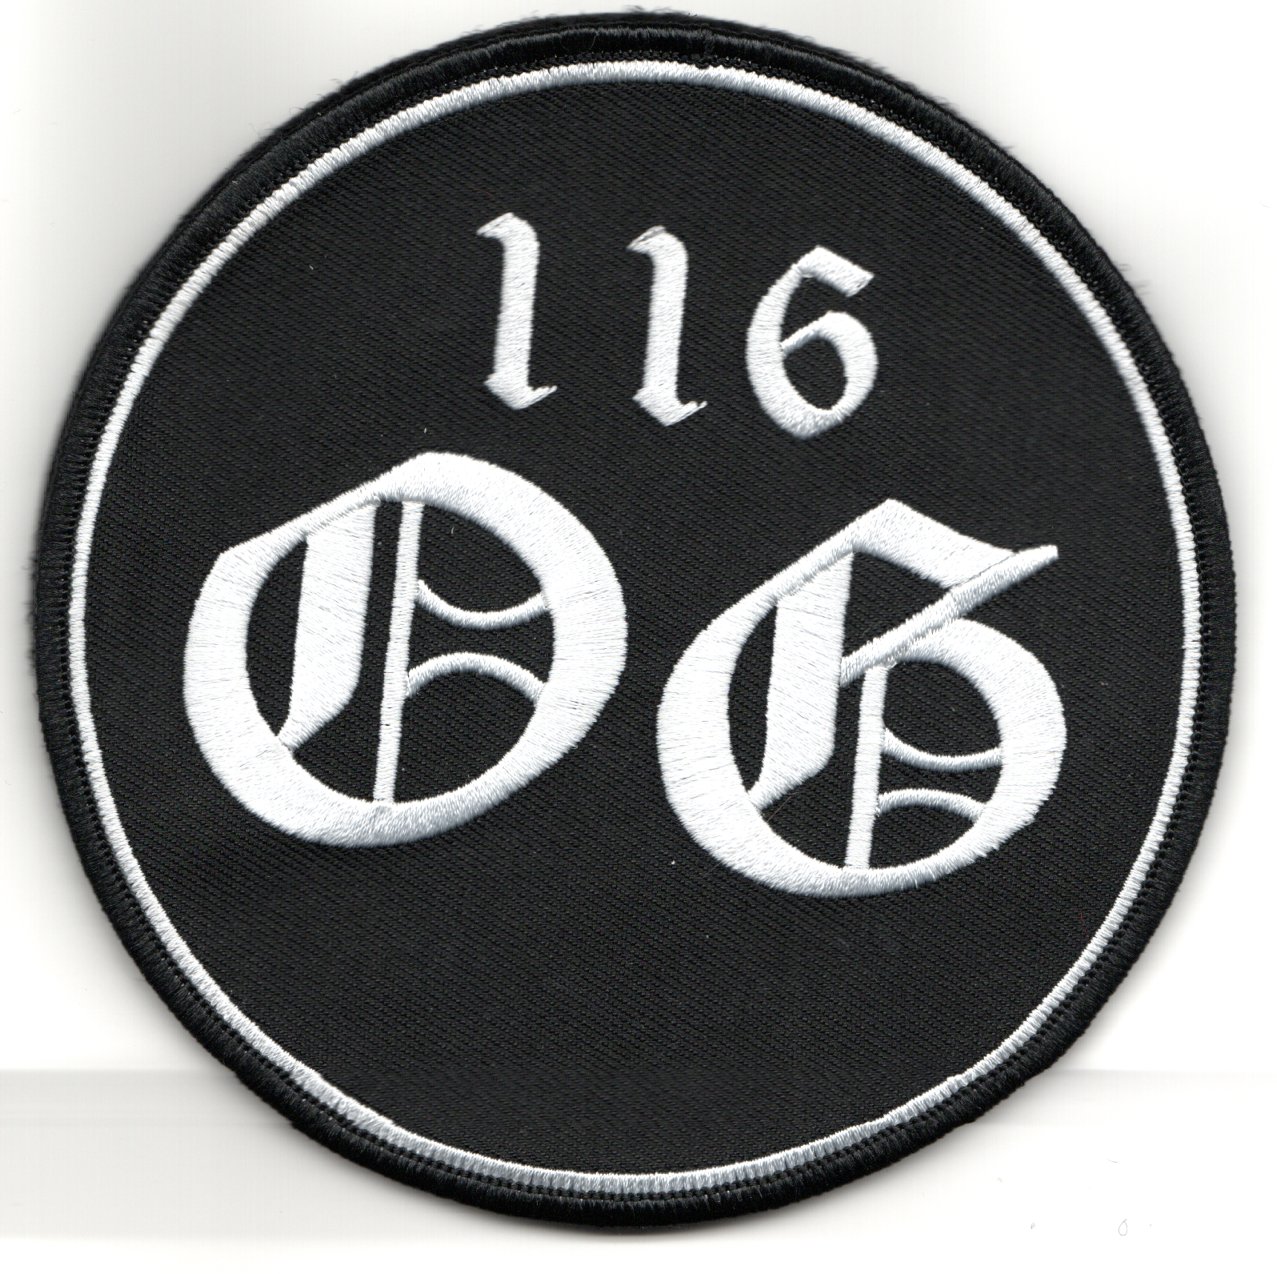 116 OG 'Unauthorized' Friday Patch (Small/Black)